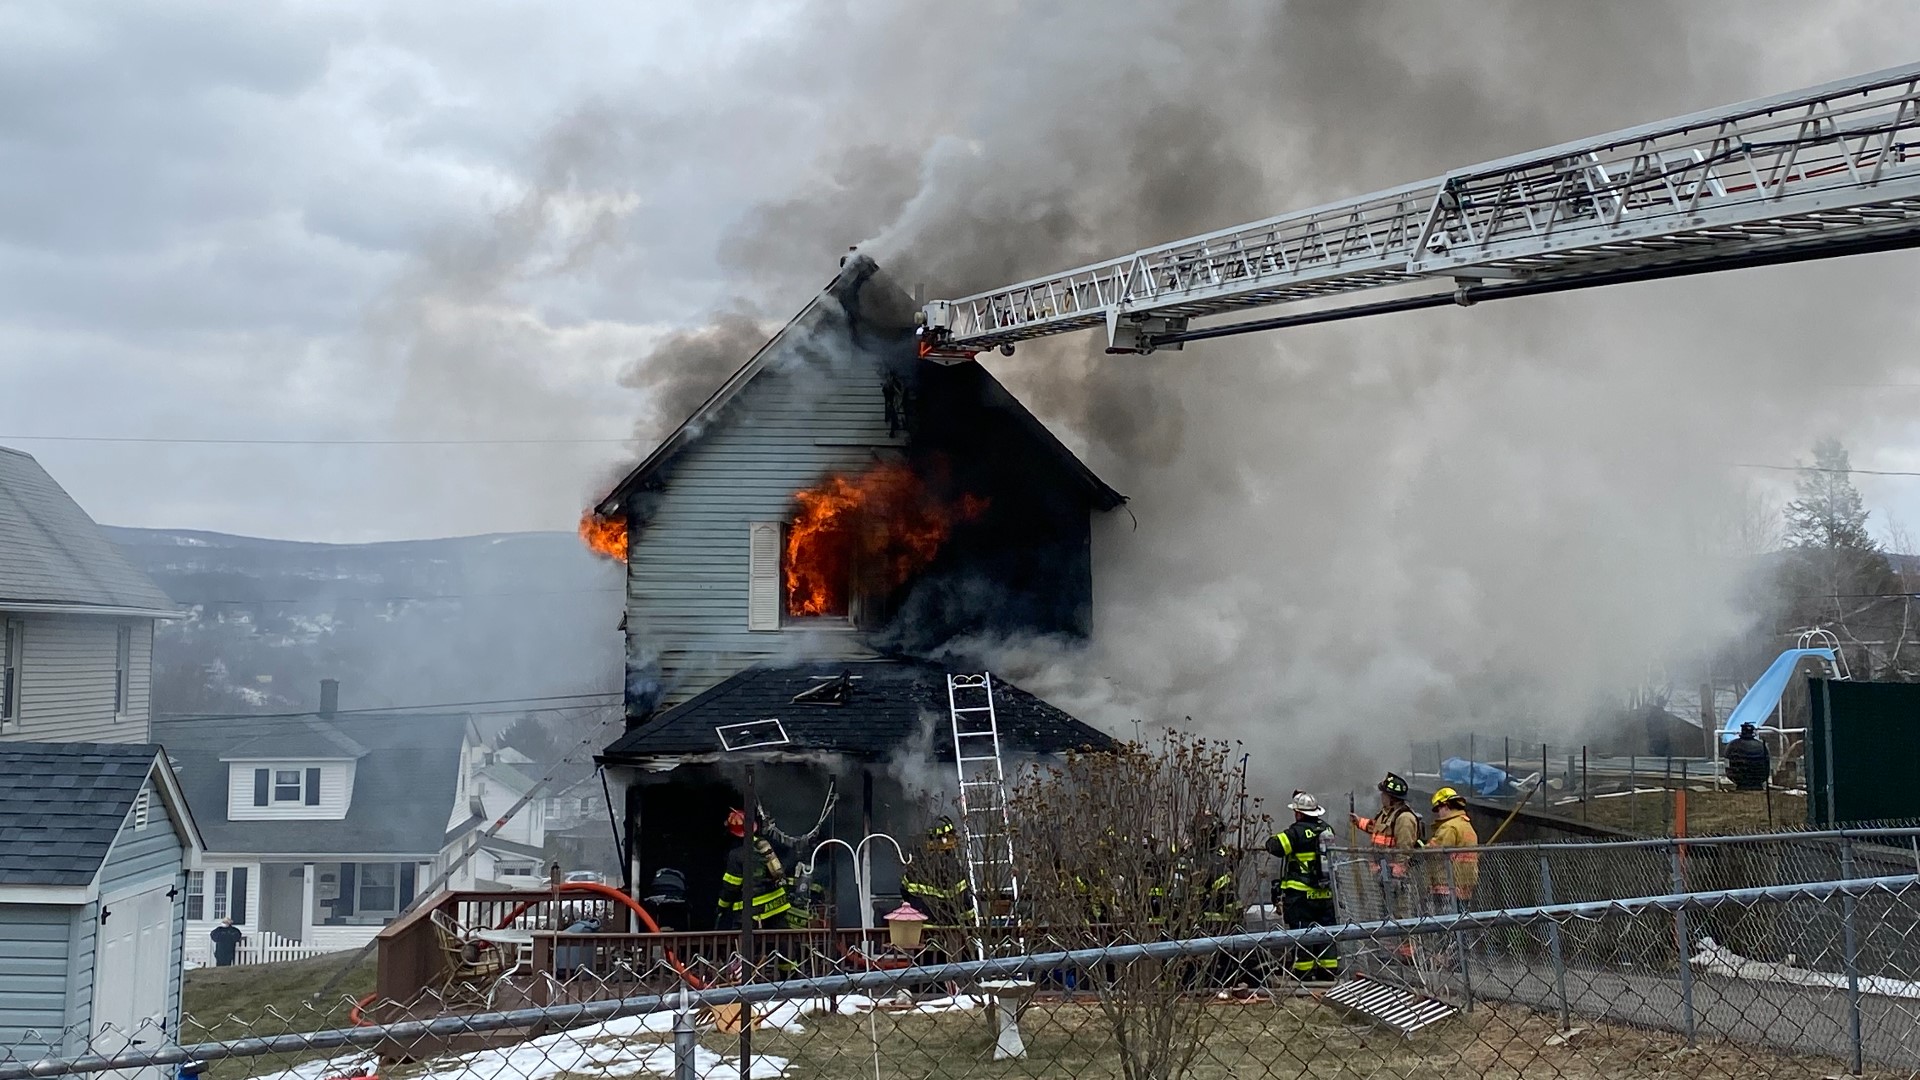 Crews say the flames broke out around 1:30 p.m. on Saturday.